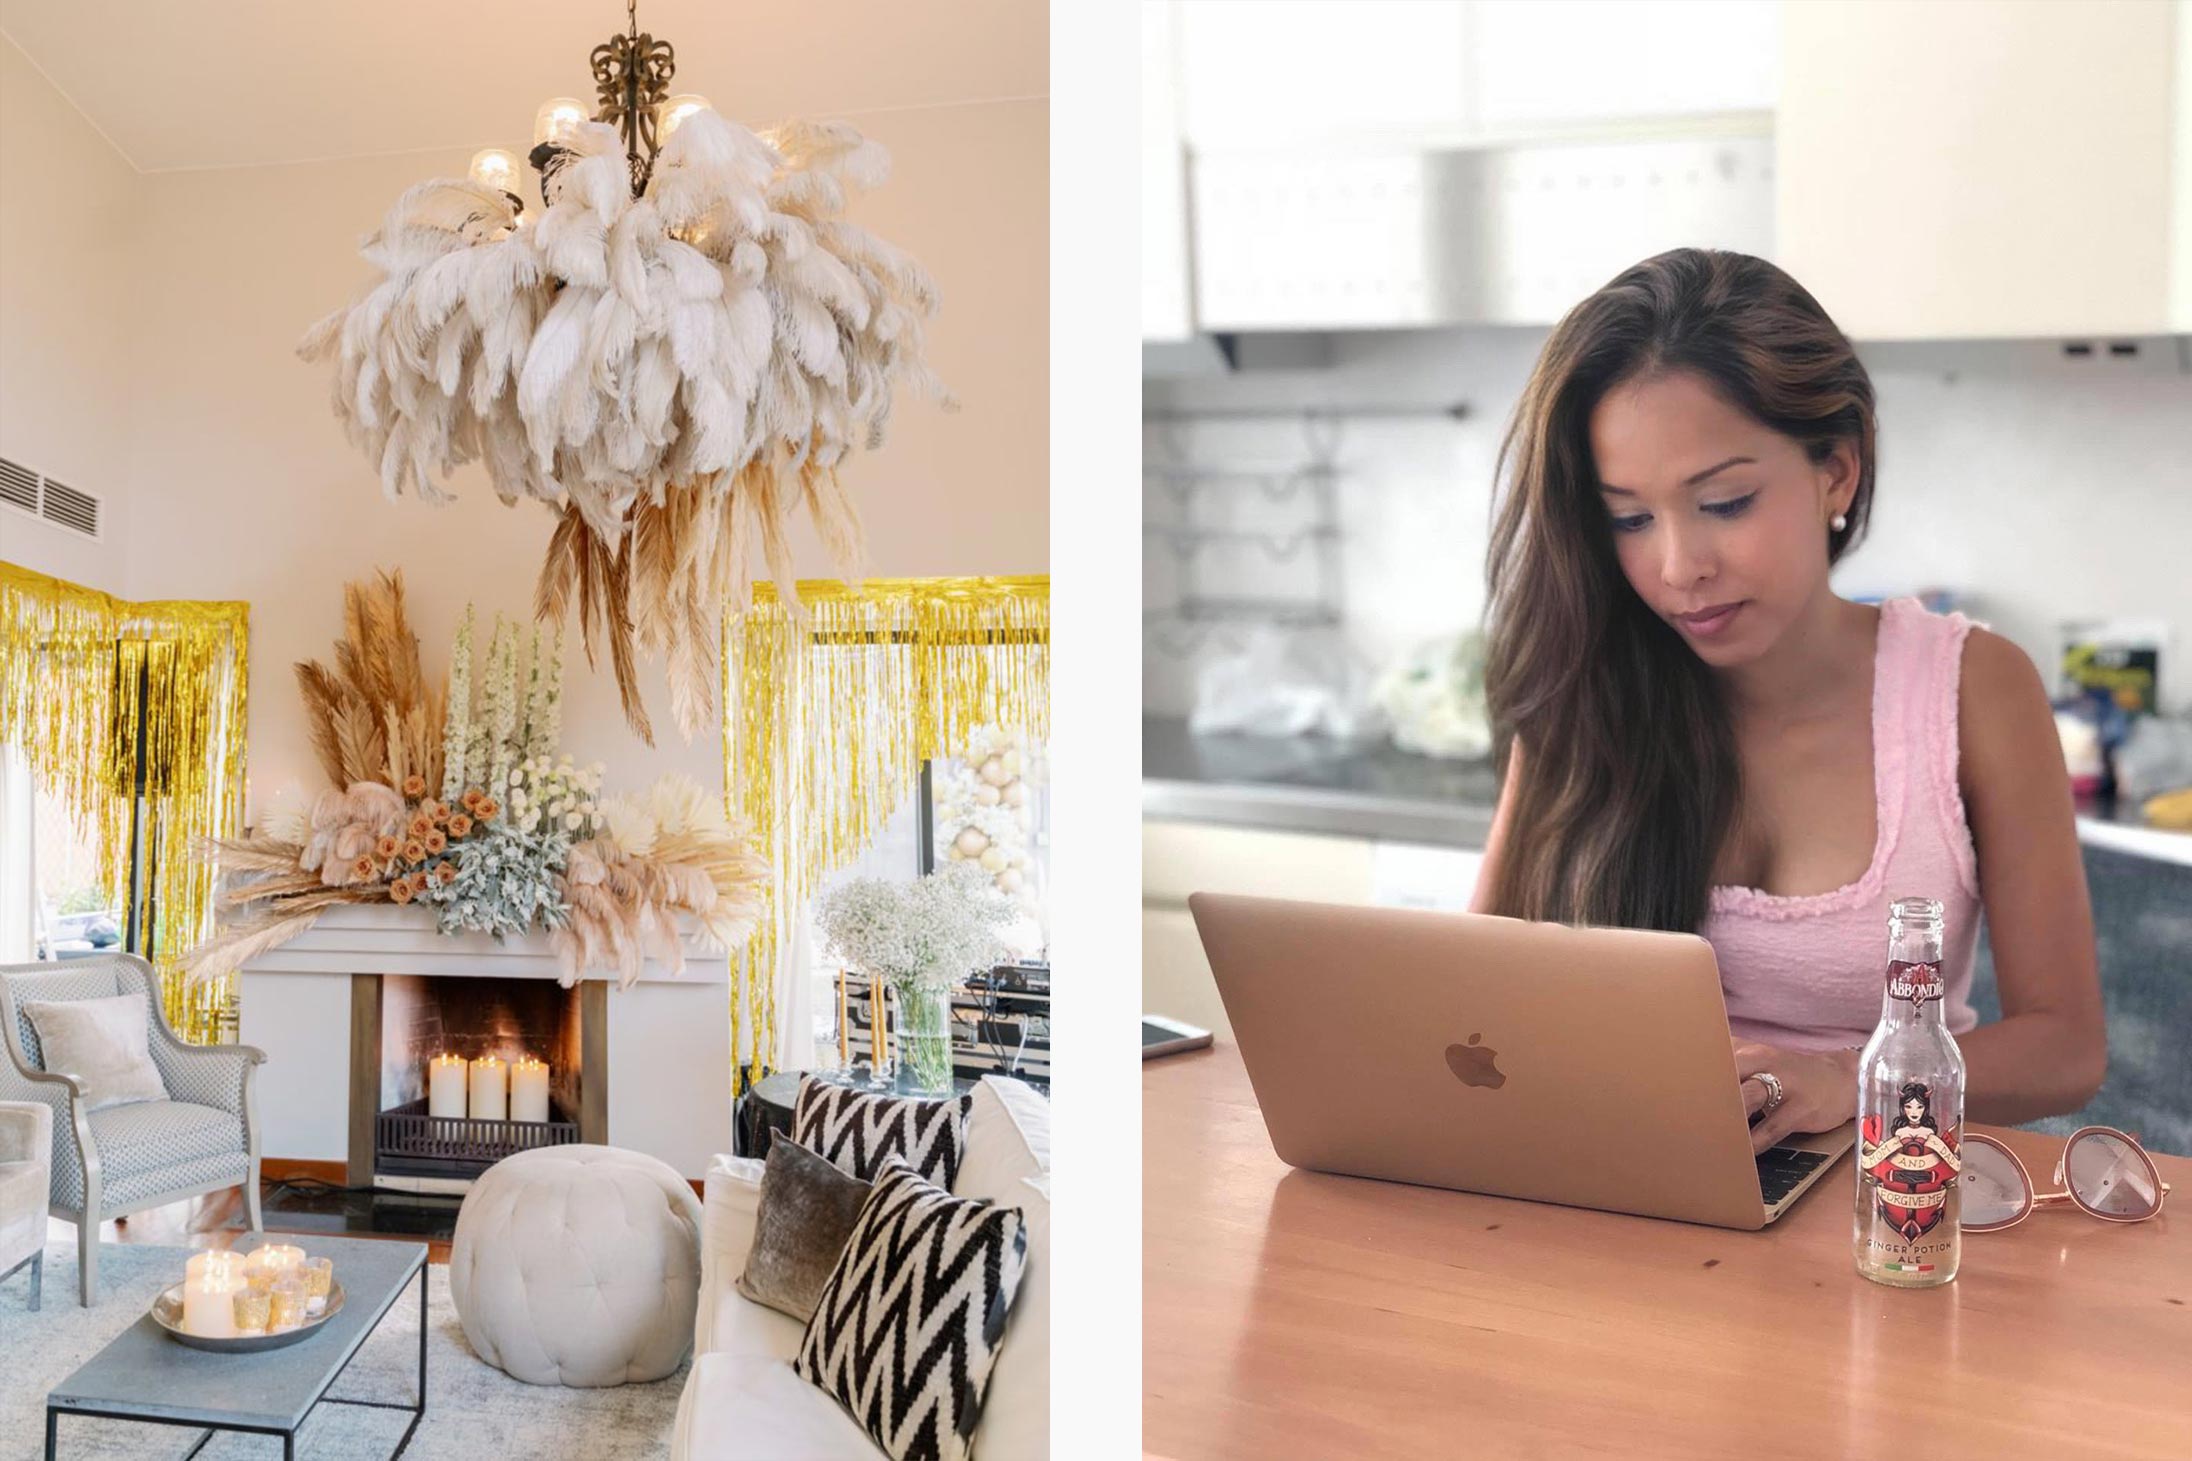 Left: The Great Gatsby party featuring an ostrich feather-clad chandelier. Right: Kim often works from home